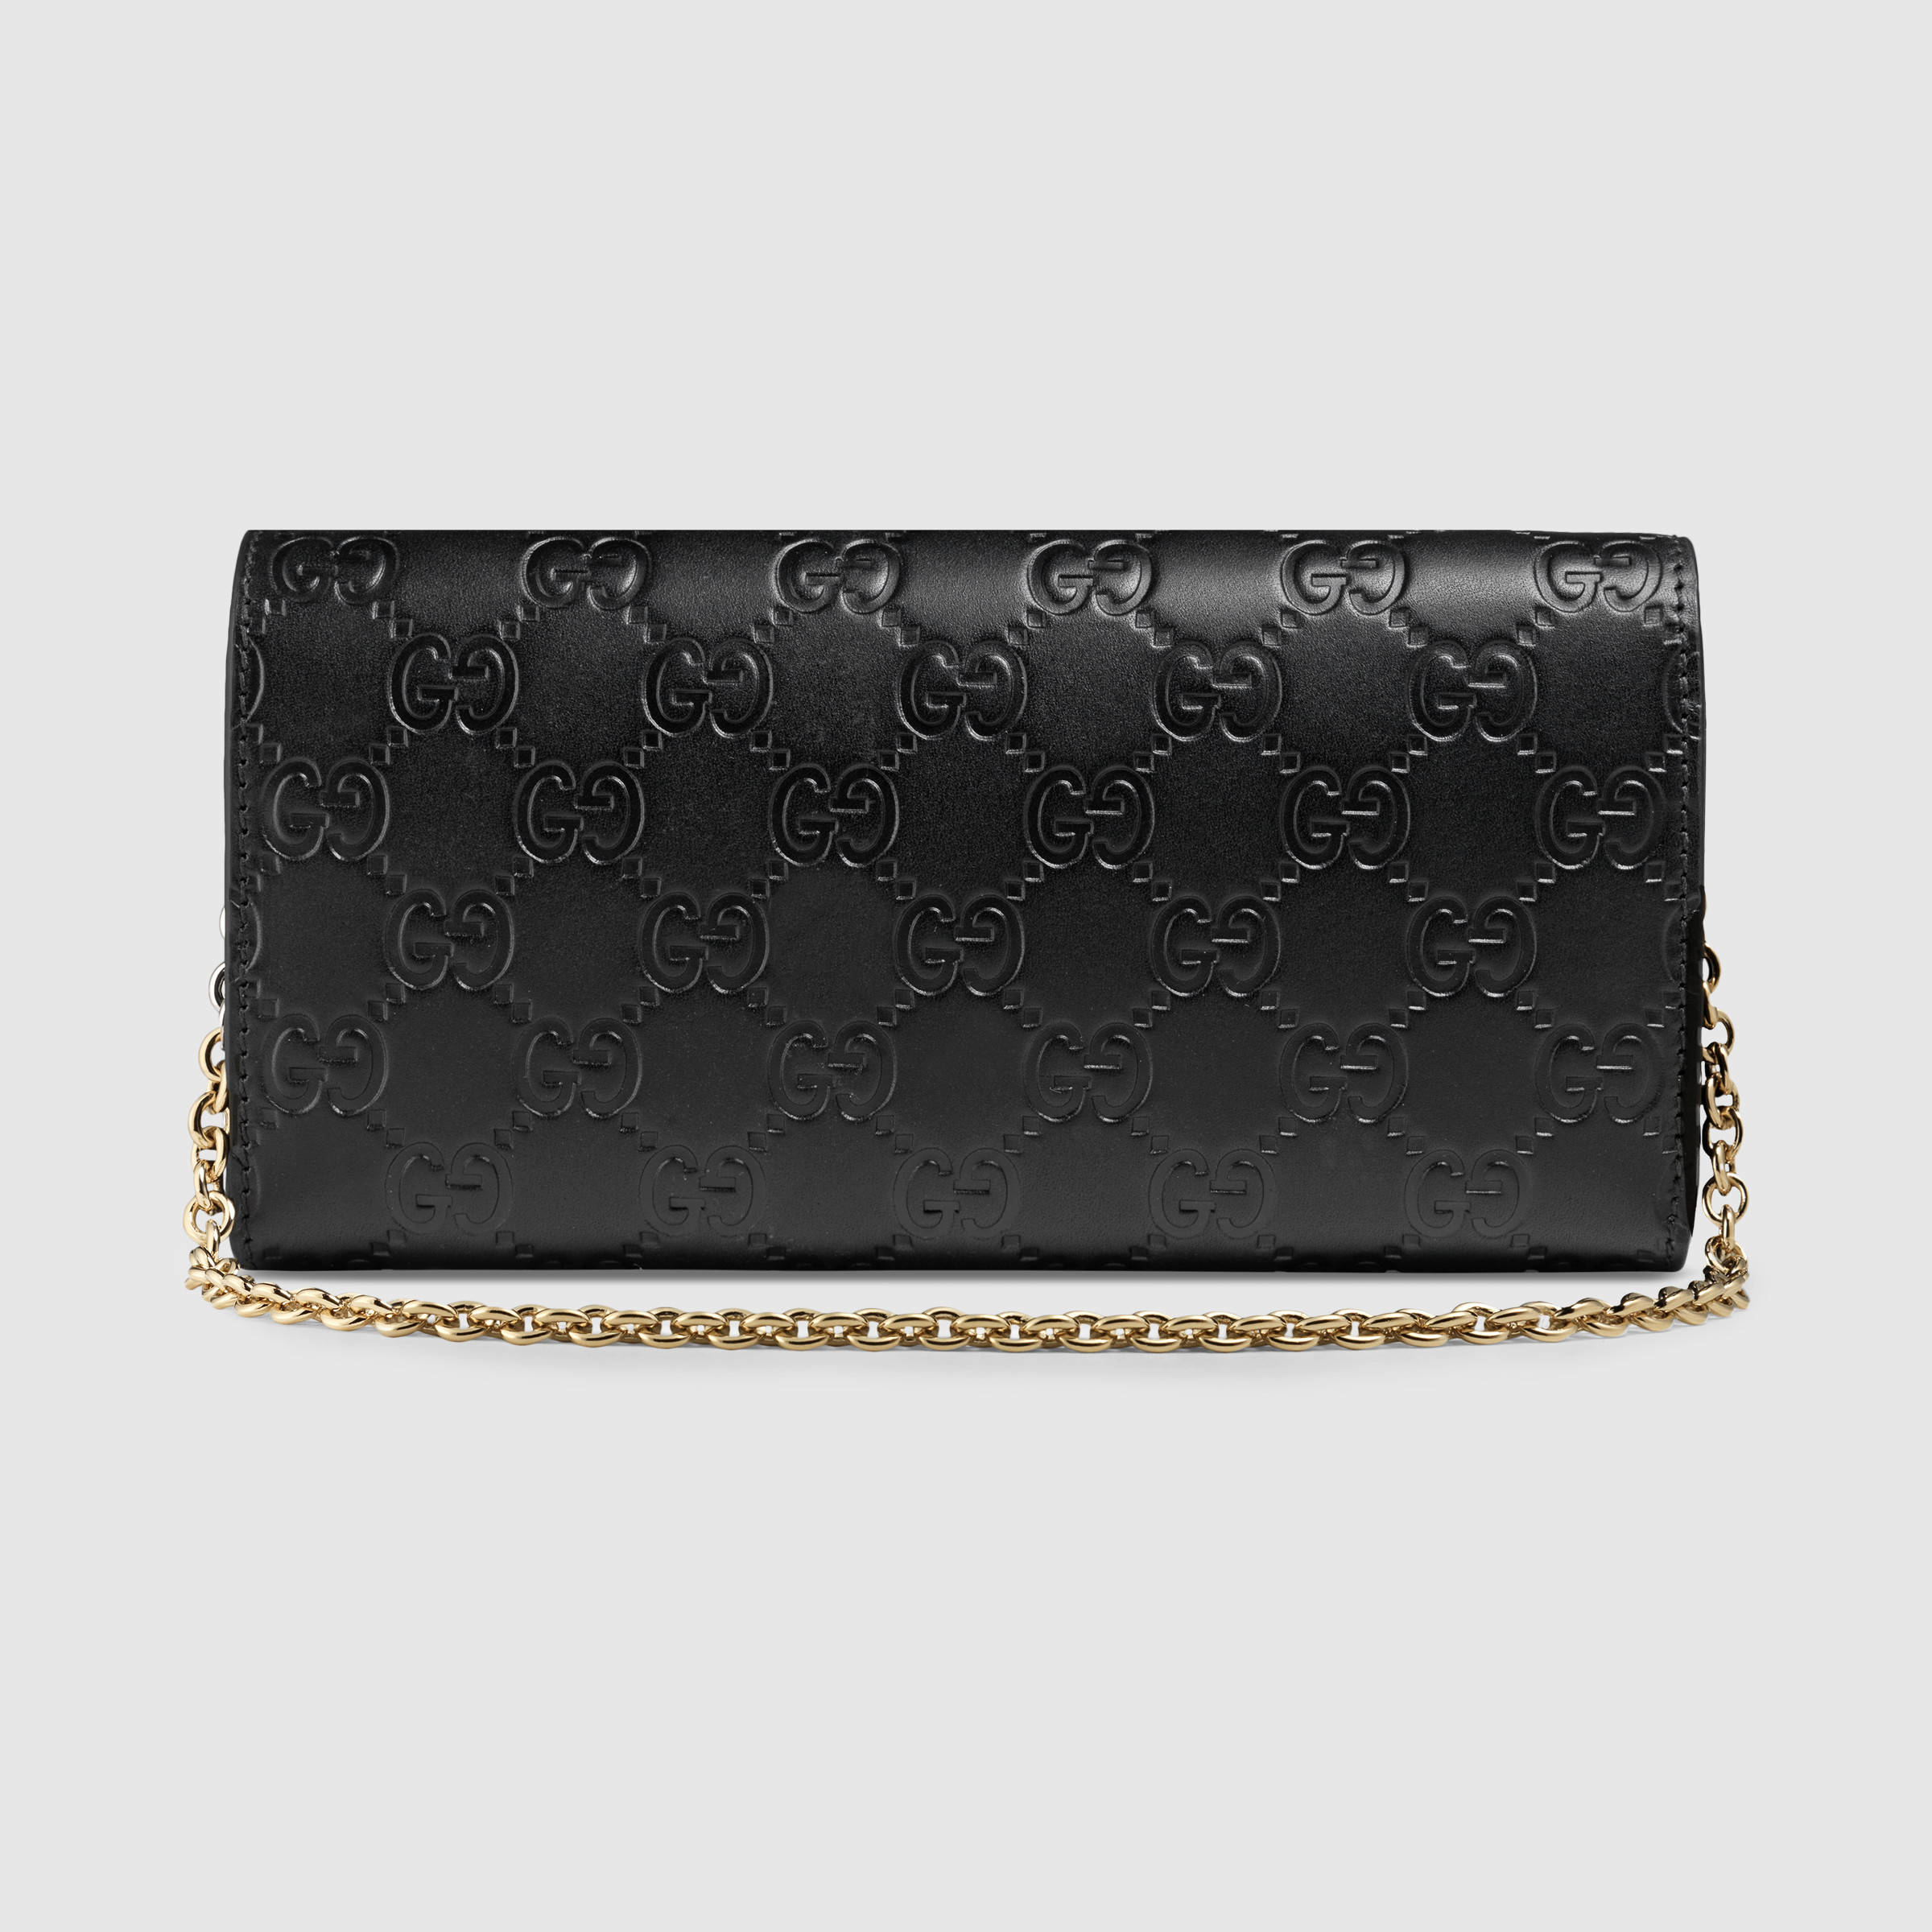 Lyst - Gucci Signature Chain Wallet in Metallic